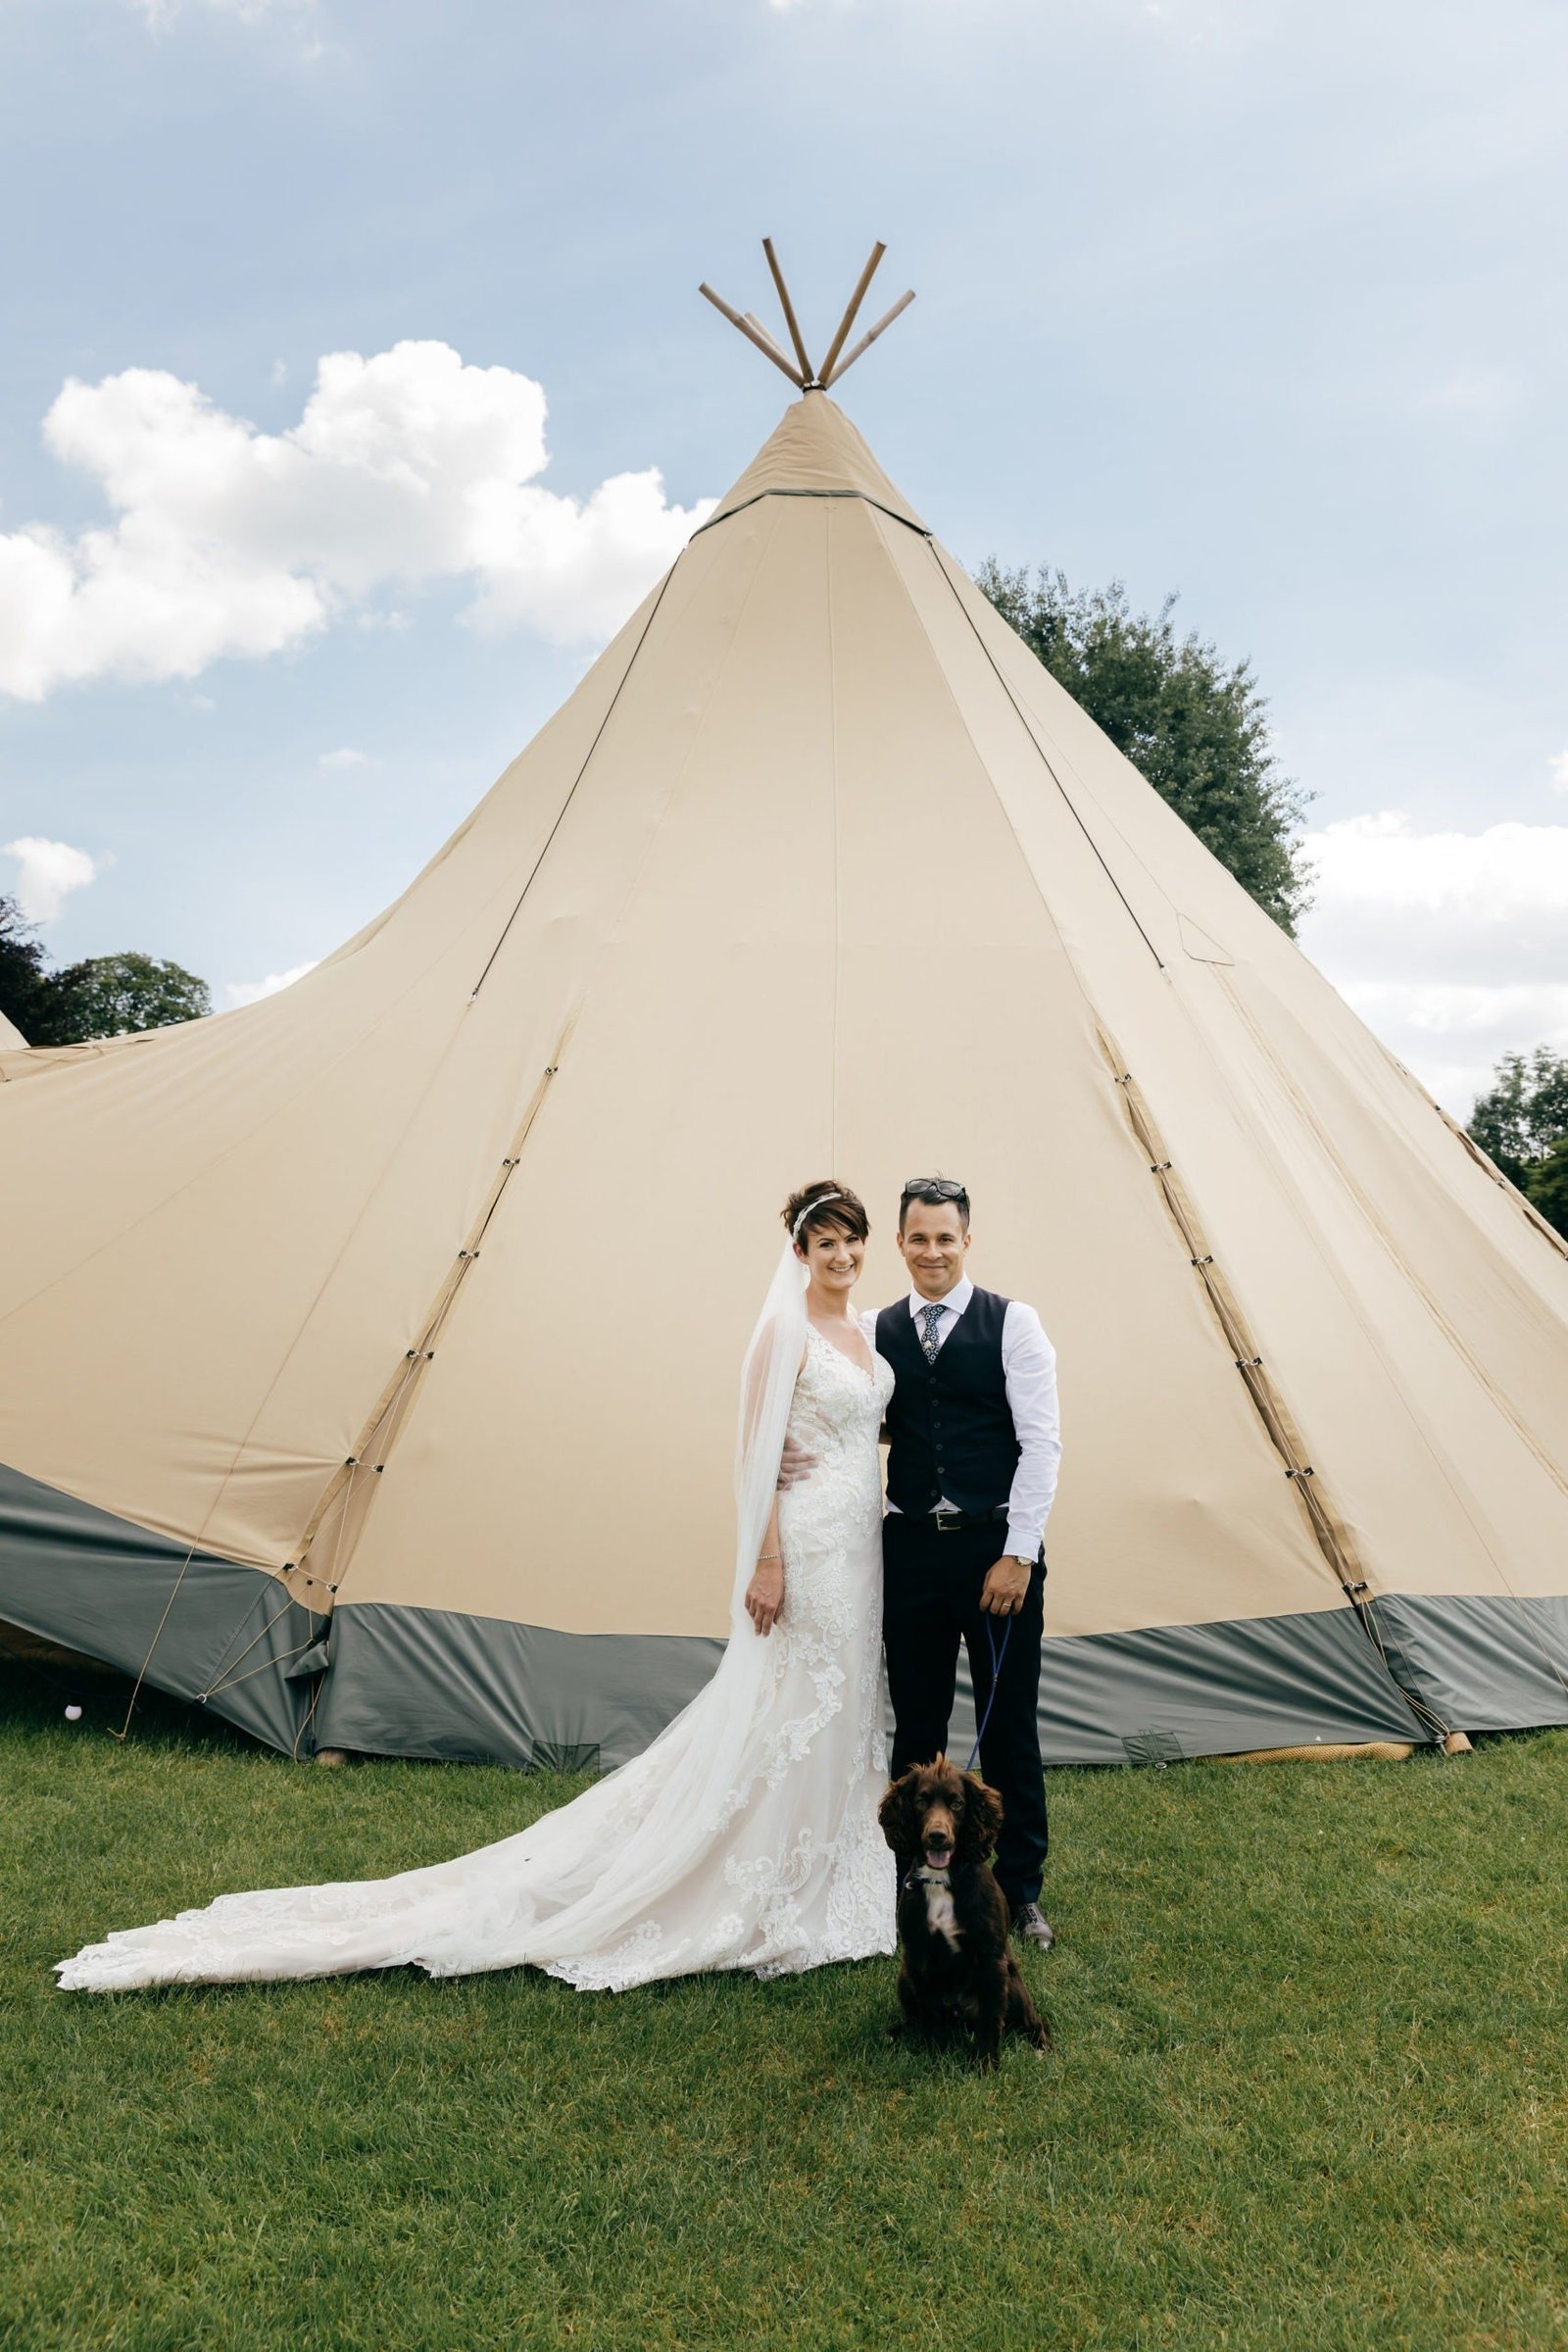 Happy couple Stacey and Hassan at Tipi Wedding